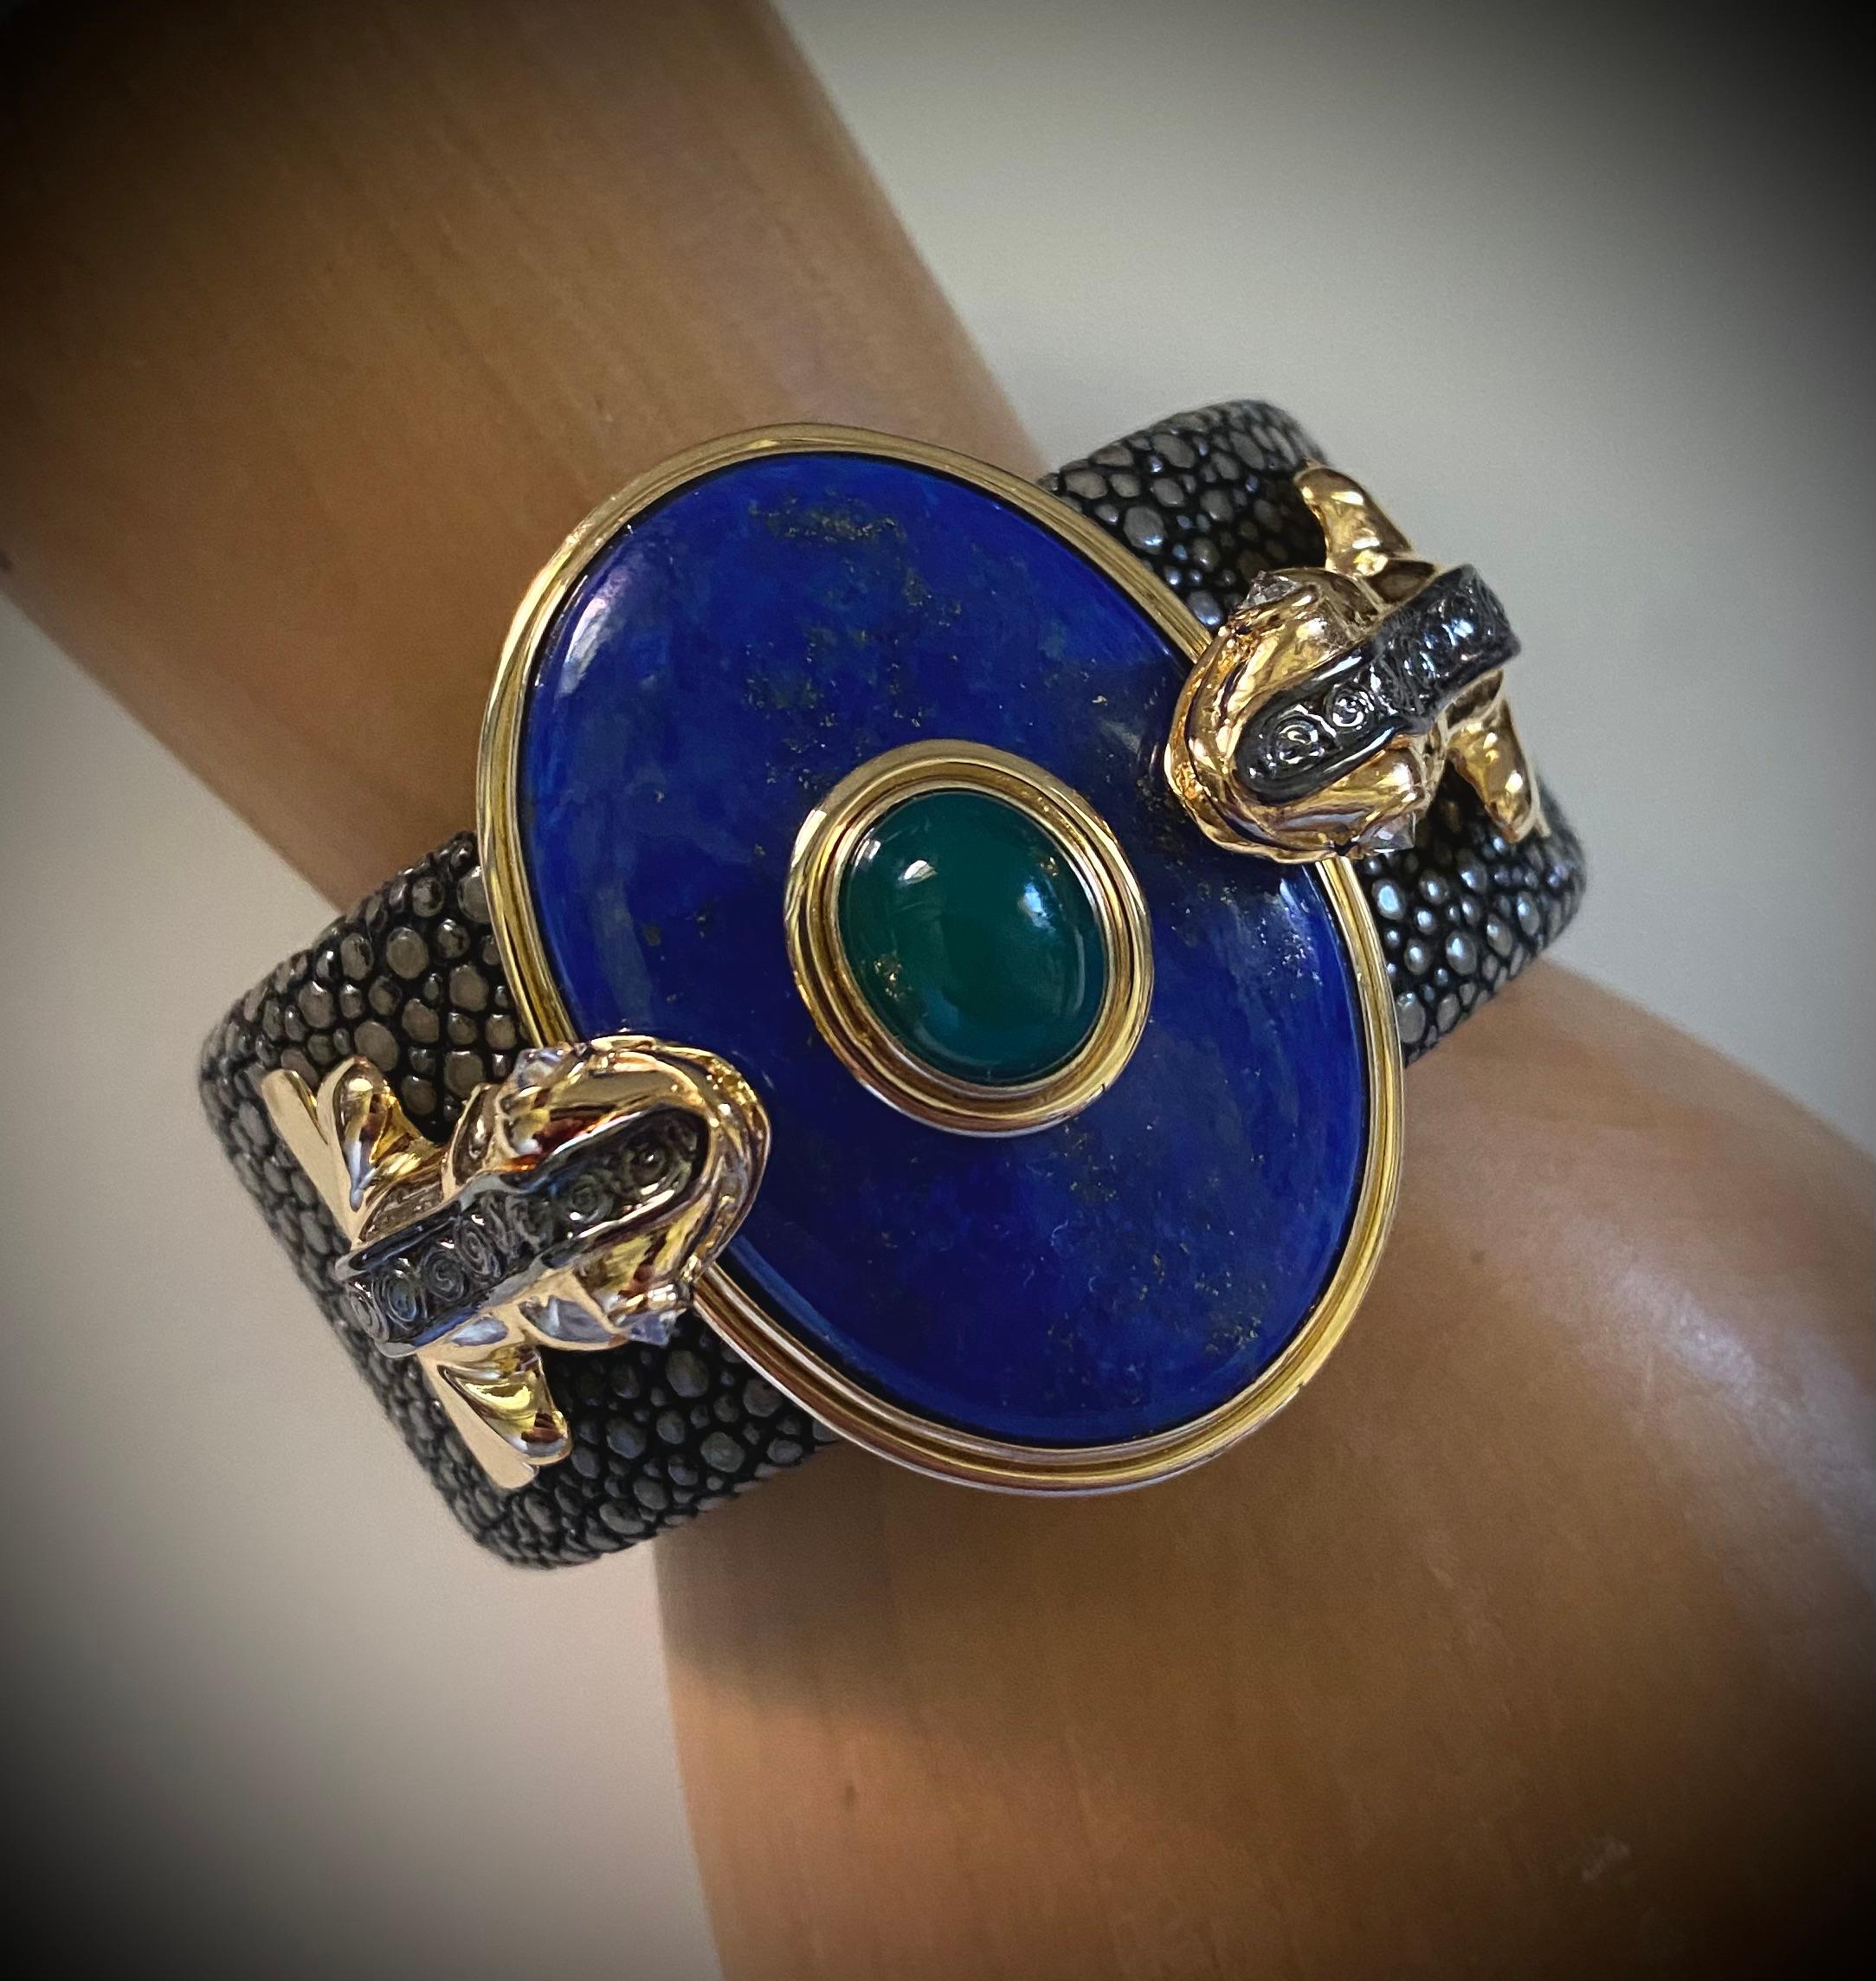 A huge lapis lazuli cabochon is mounted between two Inca Frogs in this spectacular cuff bracelet.  The lapis (origin: Peru) is brilliant blue in color with flecks of pyrite and is well polished  The frogs have reverse set diamond eyes and a black